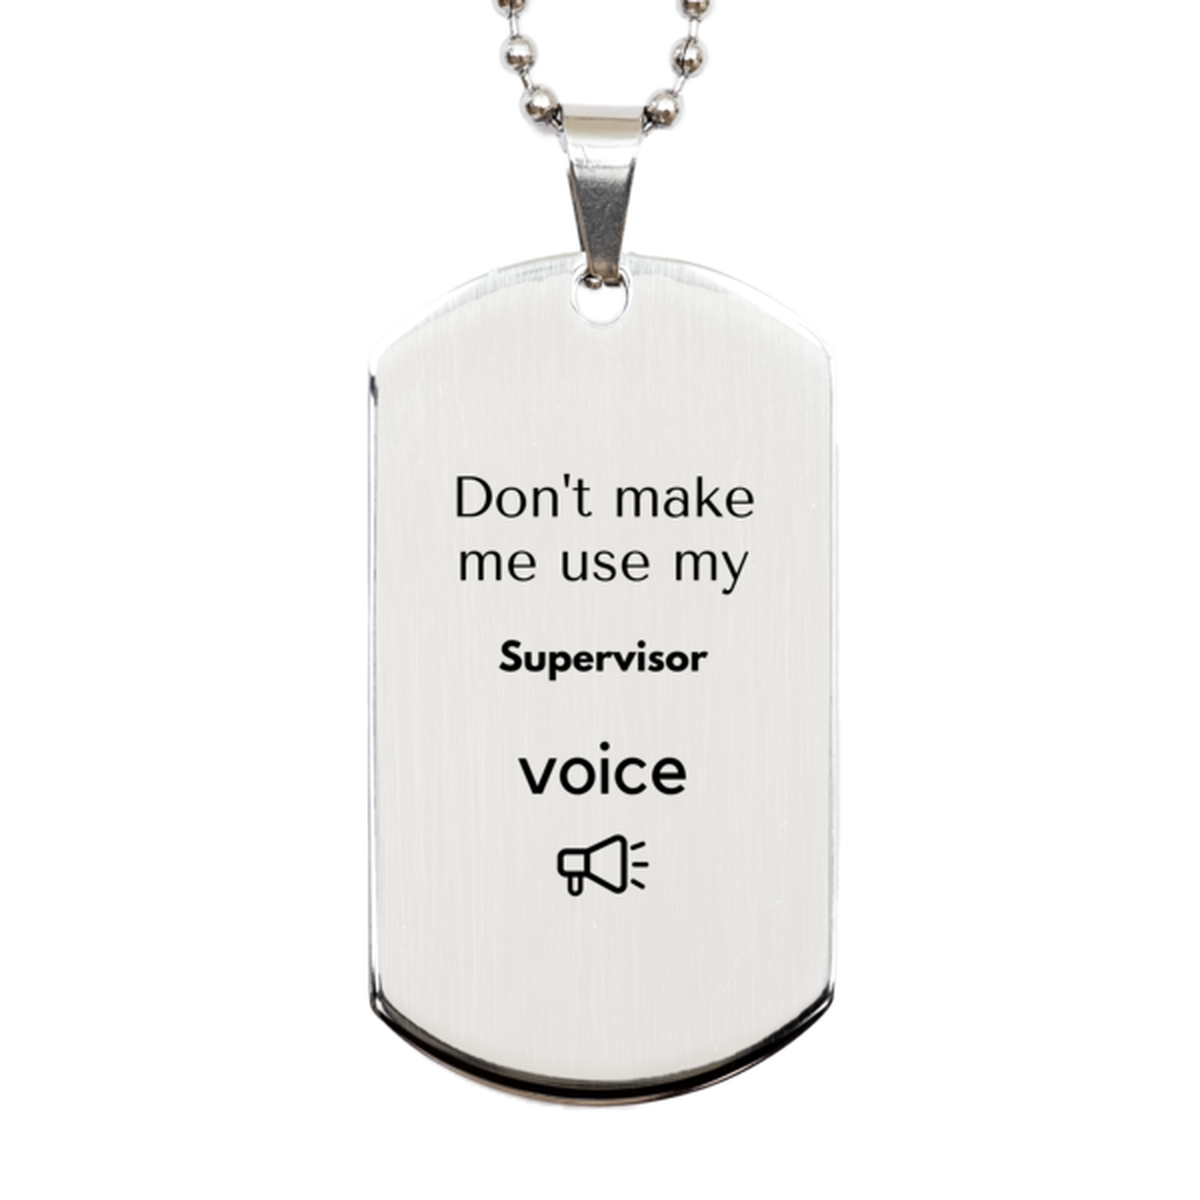 Don't make me use my Supervisor voice, Sarcasm Supervisor Gifts, Christmas Supervisor Silver Dog Tag Birthday Unique Gifts For Supervisor Coworkers, Men, Women, Colleague, Friends